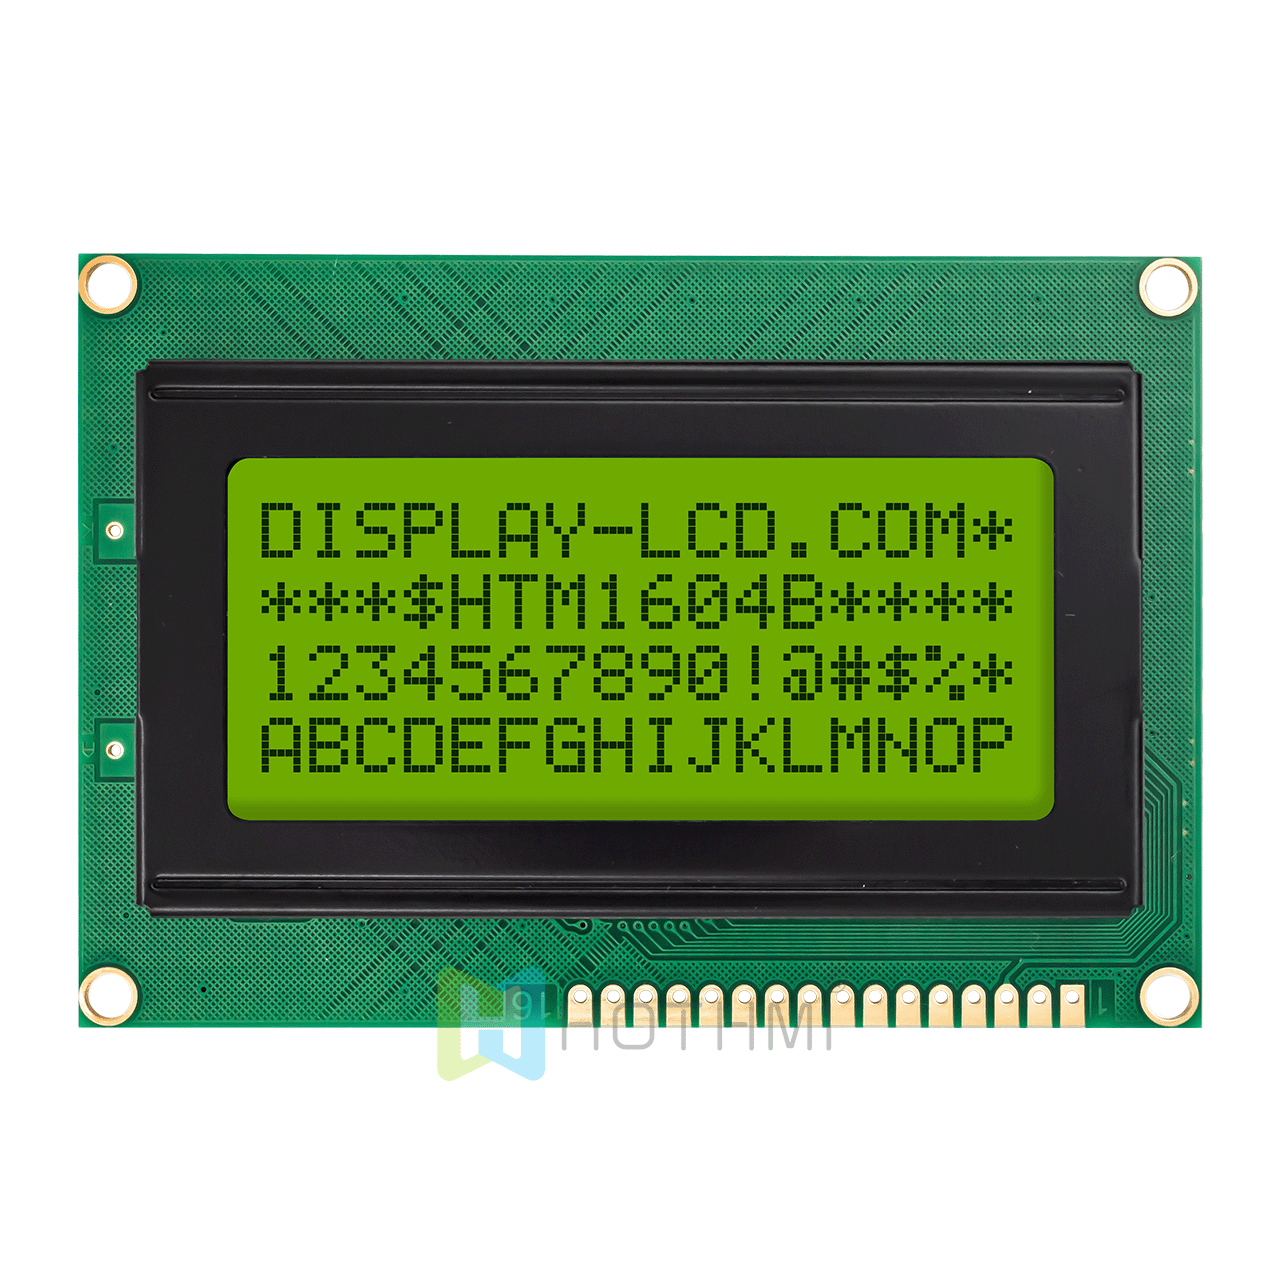 4x16 Character LCD Module | STN(+)Y/G MONO Display with Yellow/green Side Backlight | Arduino | MCU Interface | ST7066U Controller